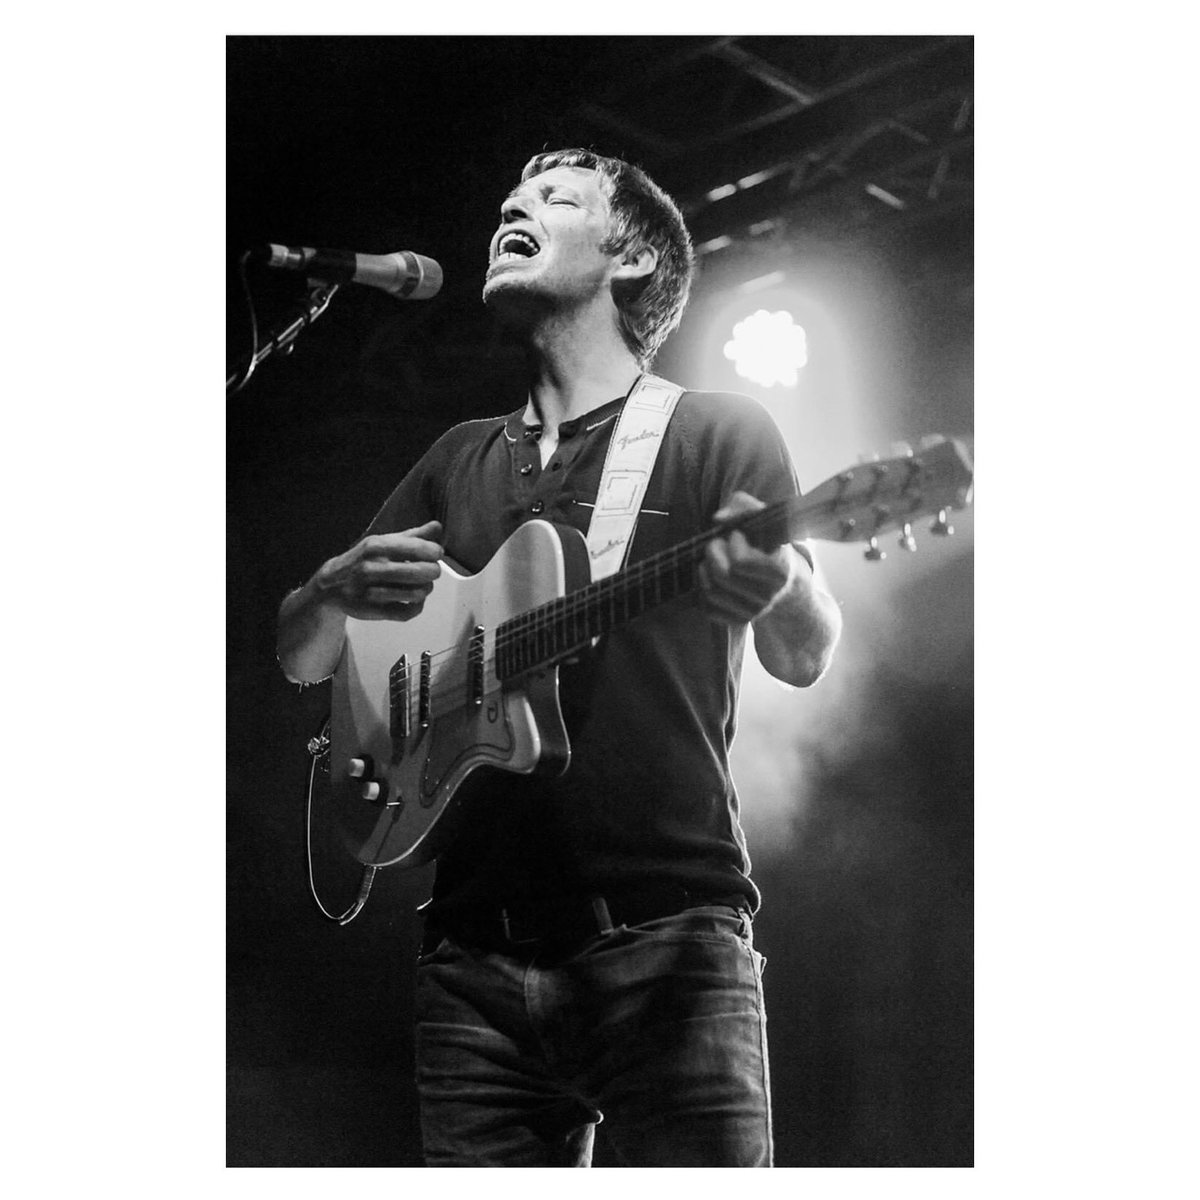 From the archive:
Lee Mavers / The La's | O2 Academy | Liverpool - September 2011

#leemavers #thelas #thereshegoes #liverpoolmusic #musicphotography #musicphotographer #johnjohno #johnjohnsonphoto